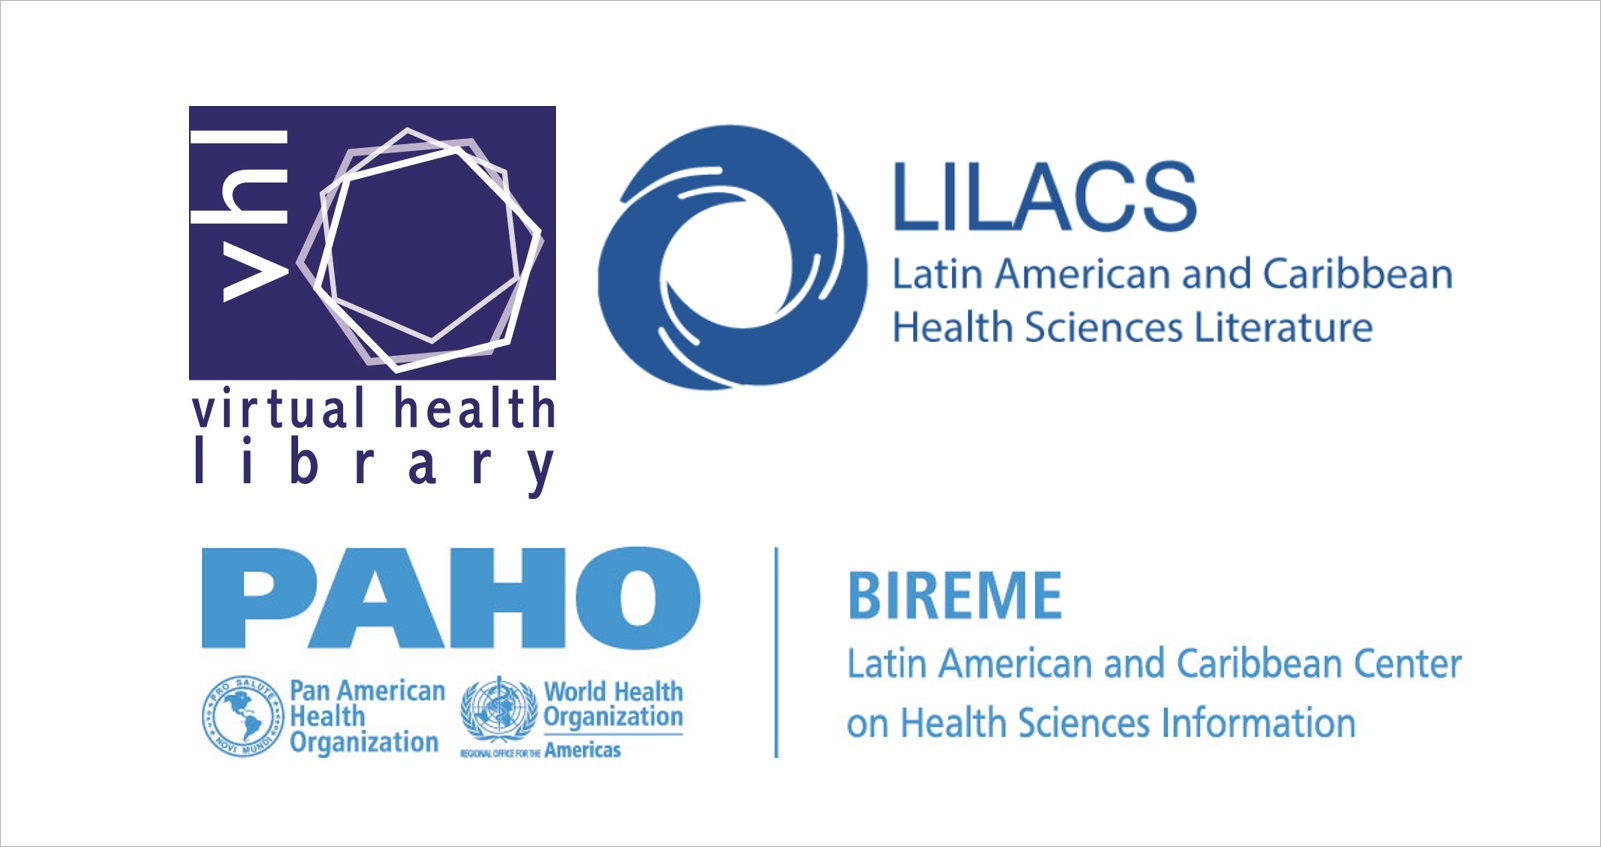 lilacs-brazil-conducts-evaluation-and-selection-of-new-journals-to-its-database